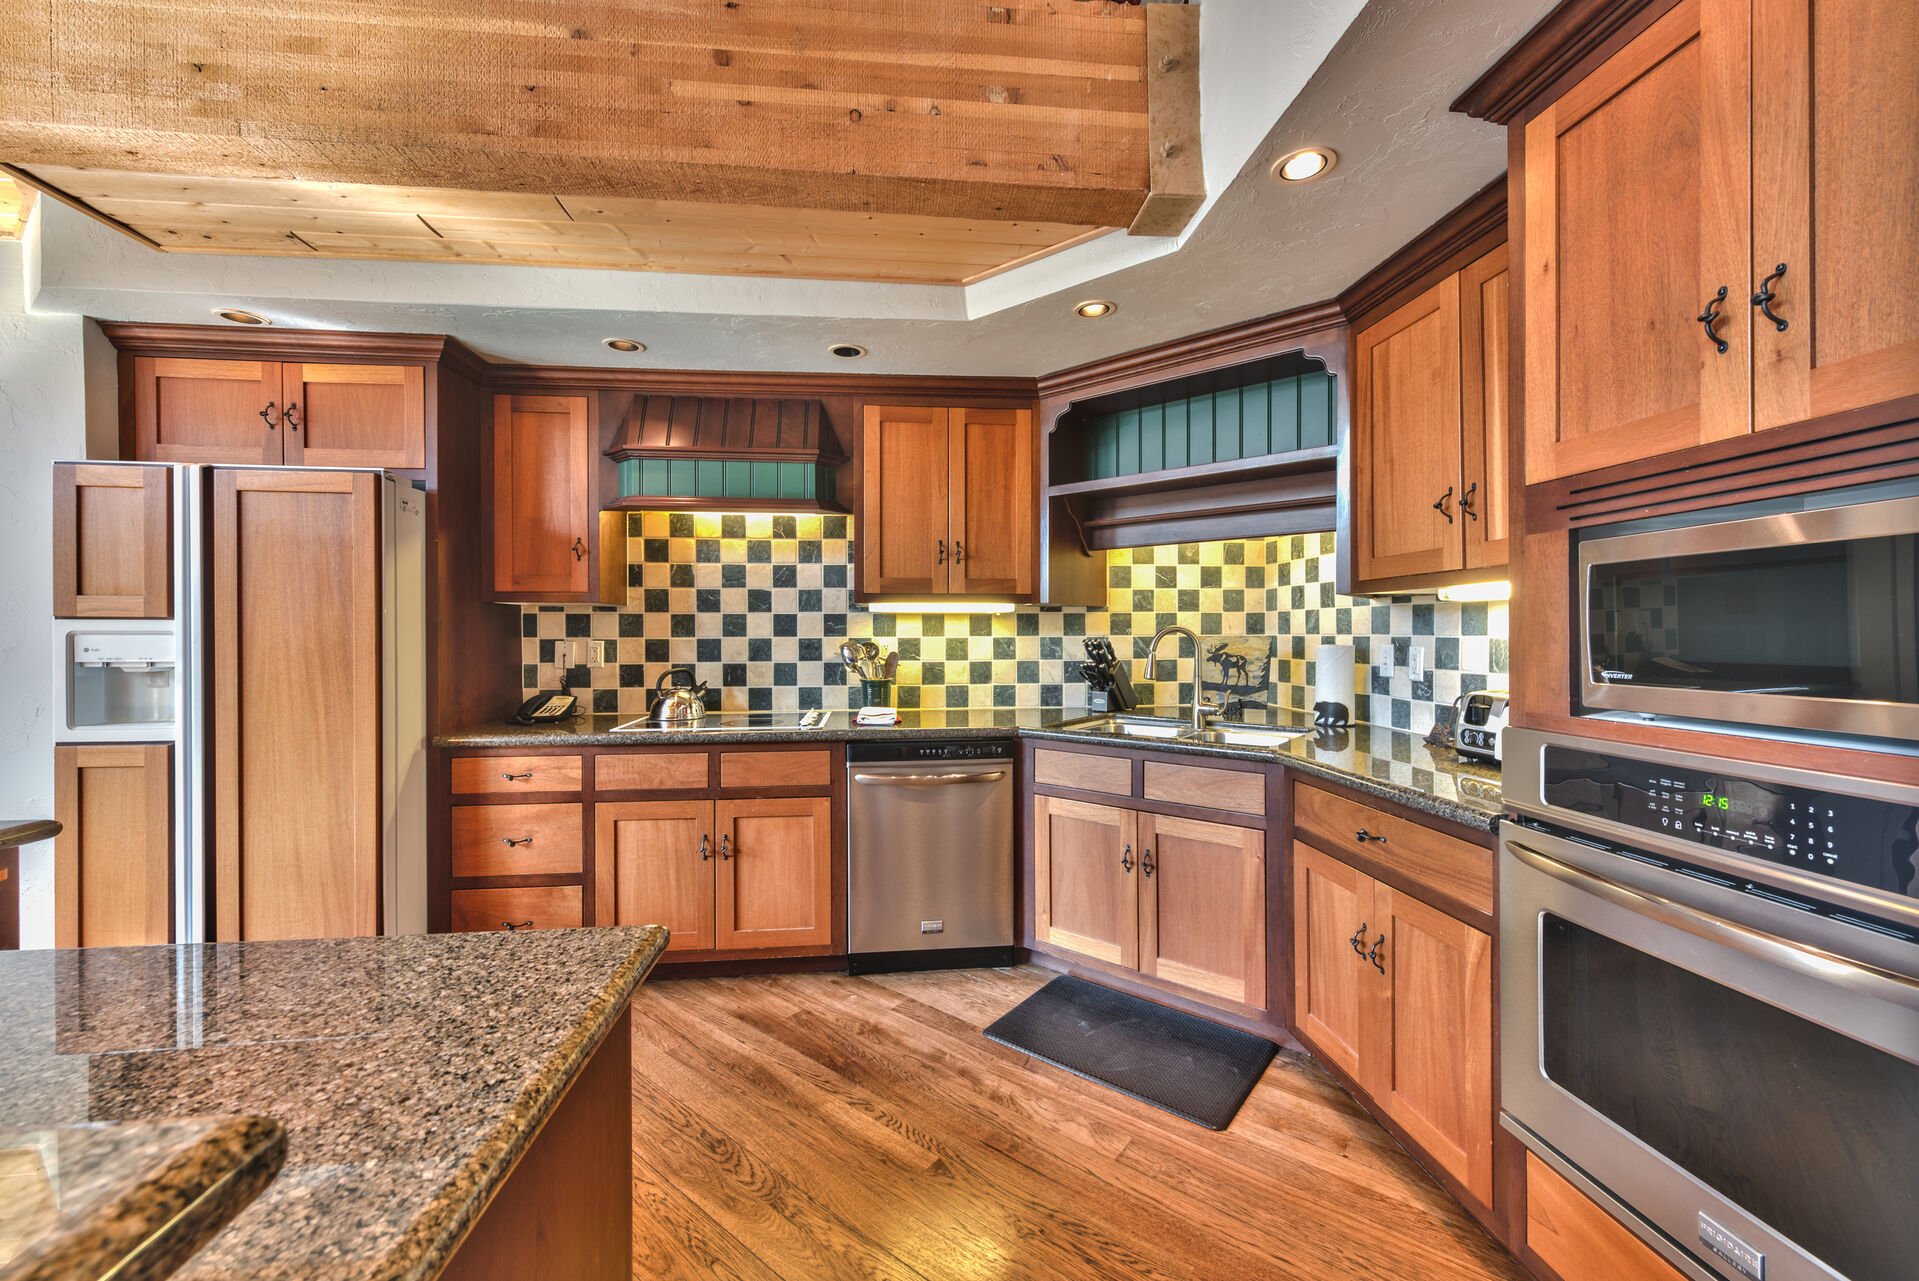 408 A- Spacious Kitchen with All the Equipment and Utensils Needed for Your Delicious Meals